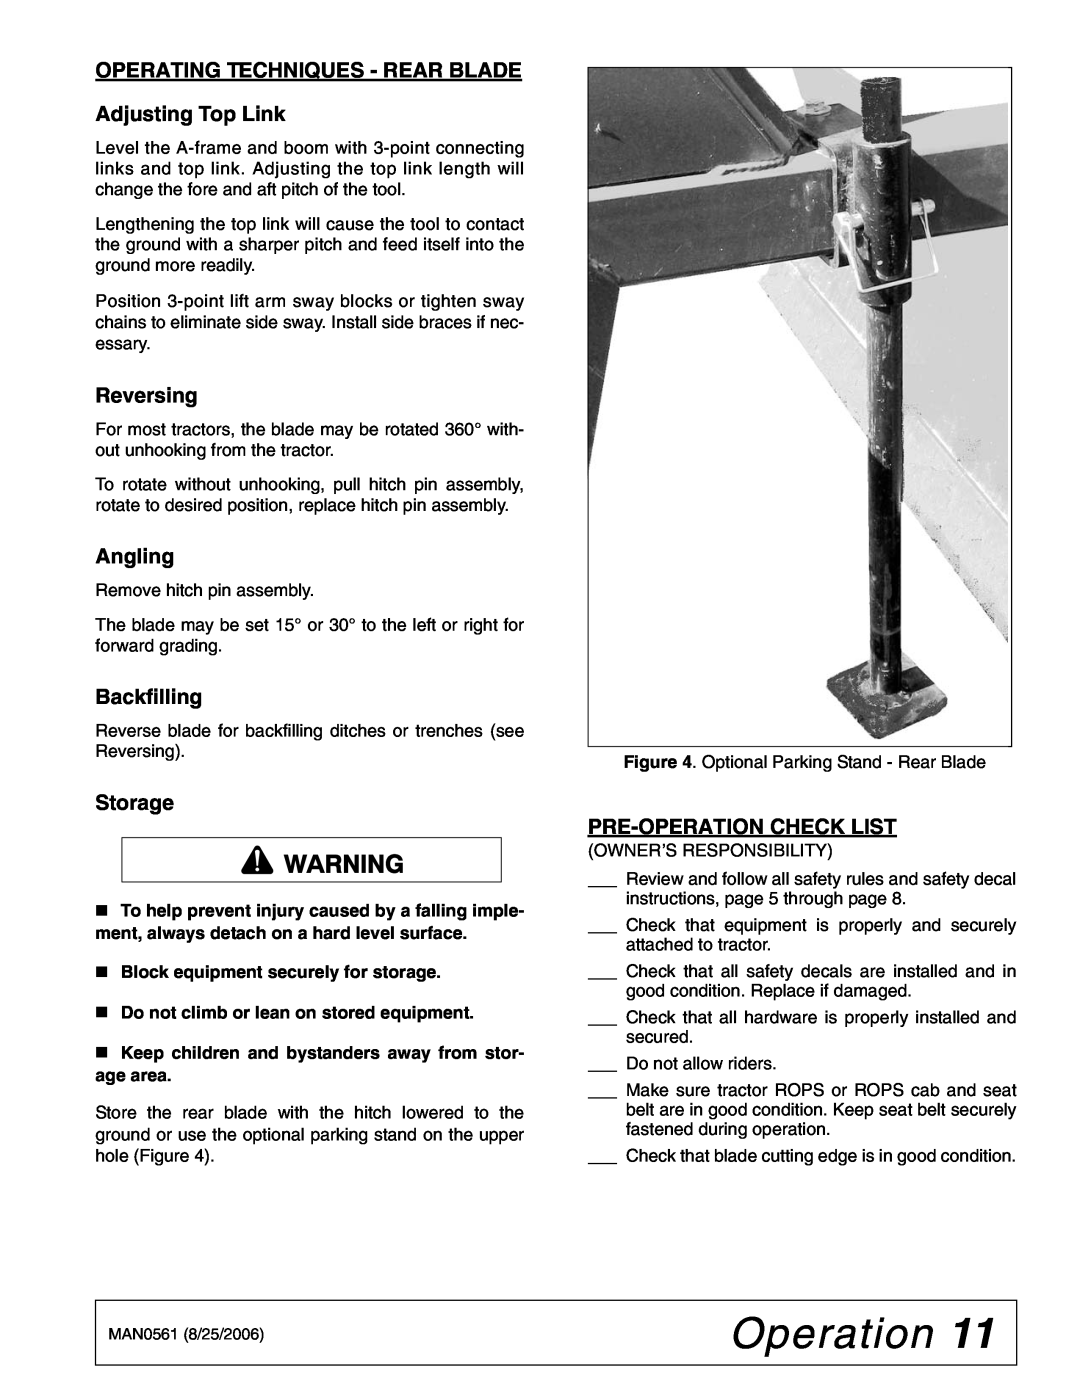 Woods Equipment BSE5 Operating Techniques - Rear Blade, Reversing, Angling, Pre-Operationcheck List, Adjusting Top Link 